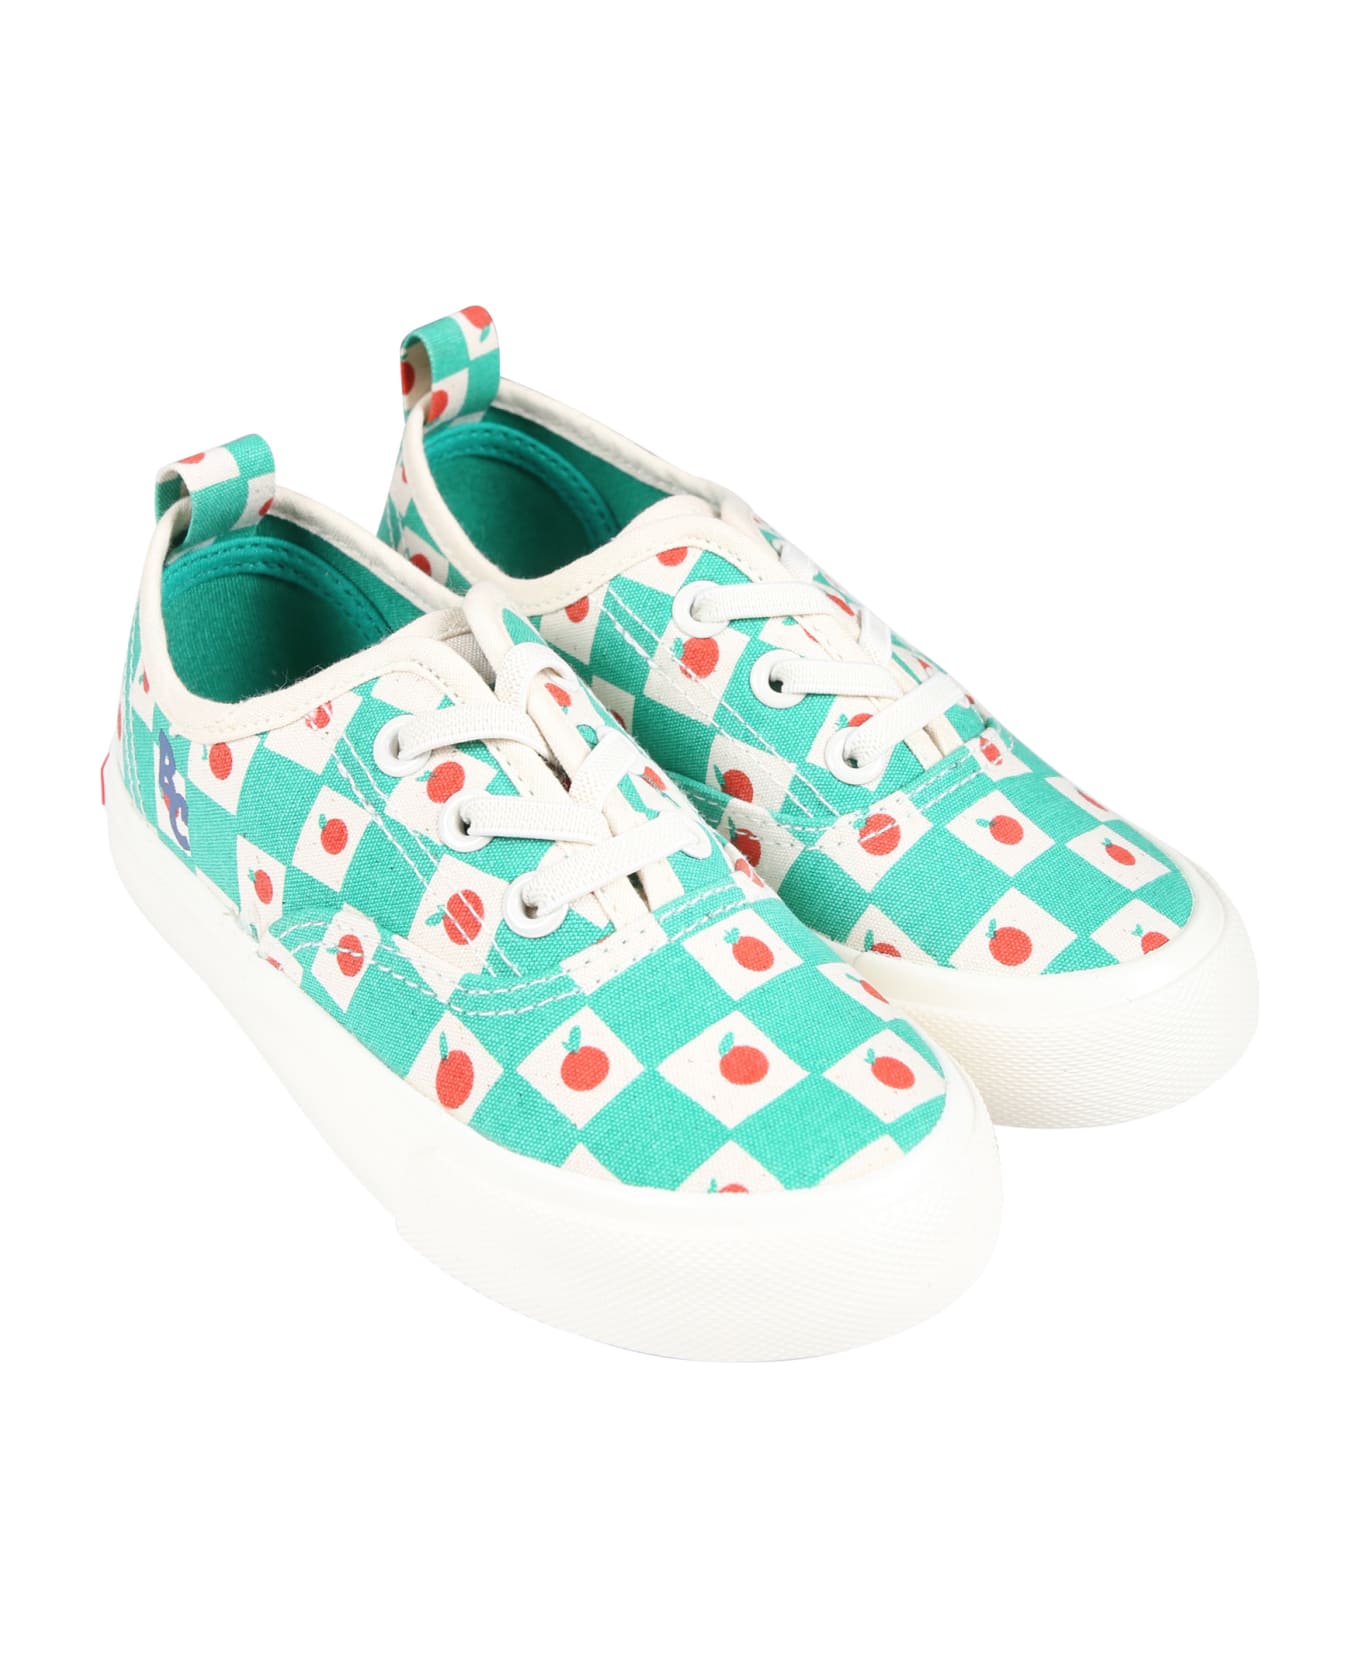 Bobo Choses Green Sneakers For Kids With Tomatoes - Green シューズ